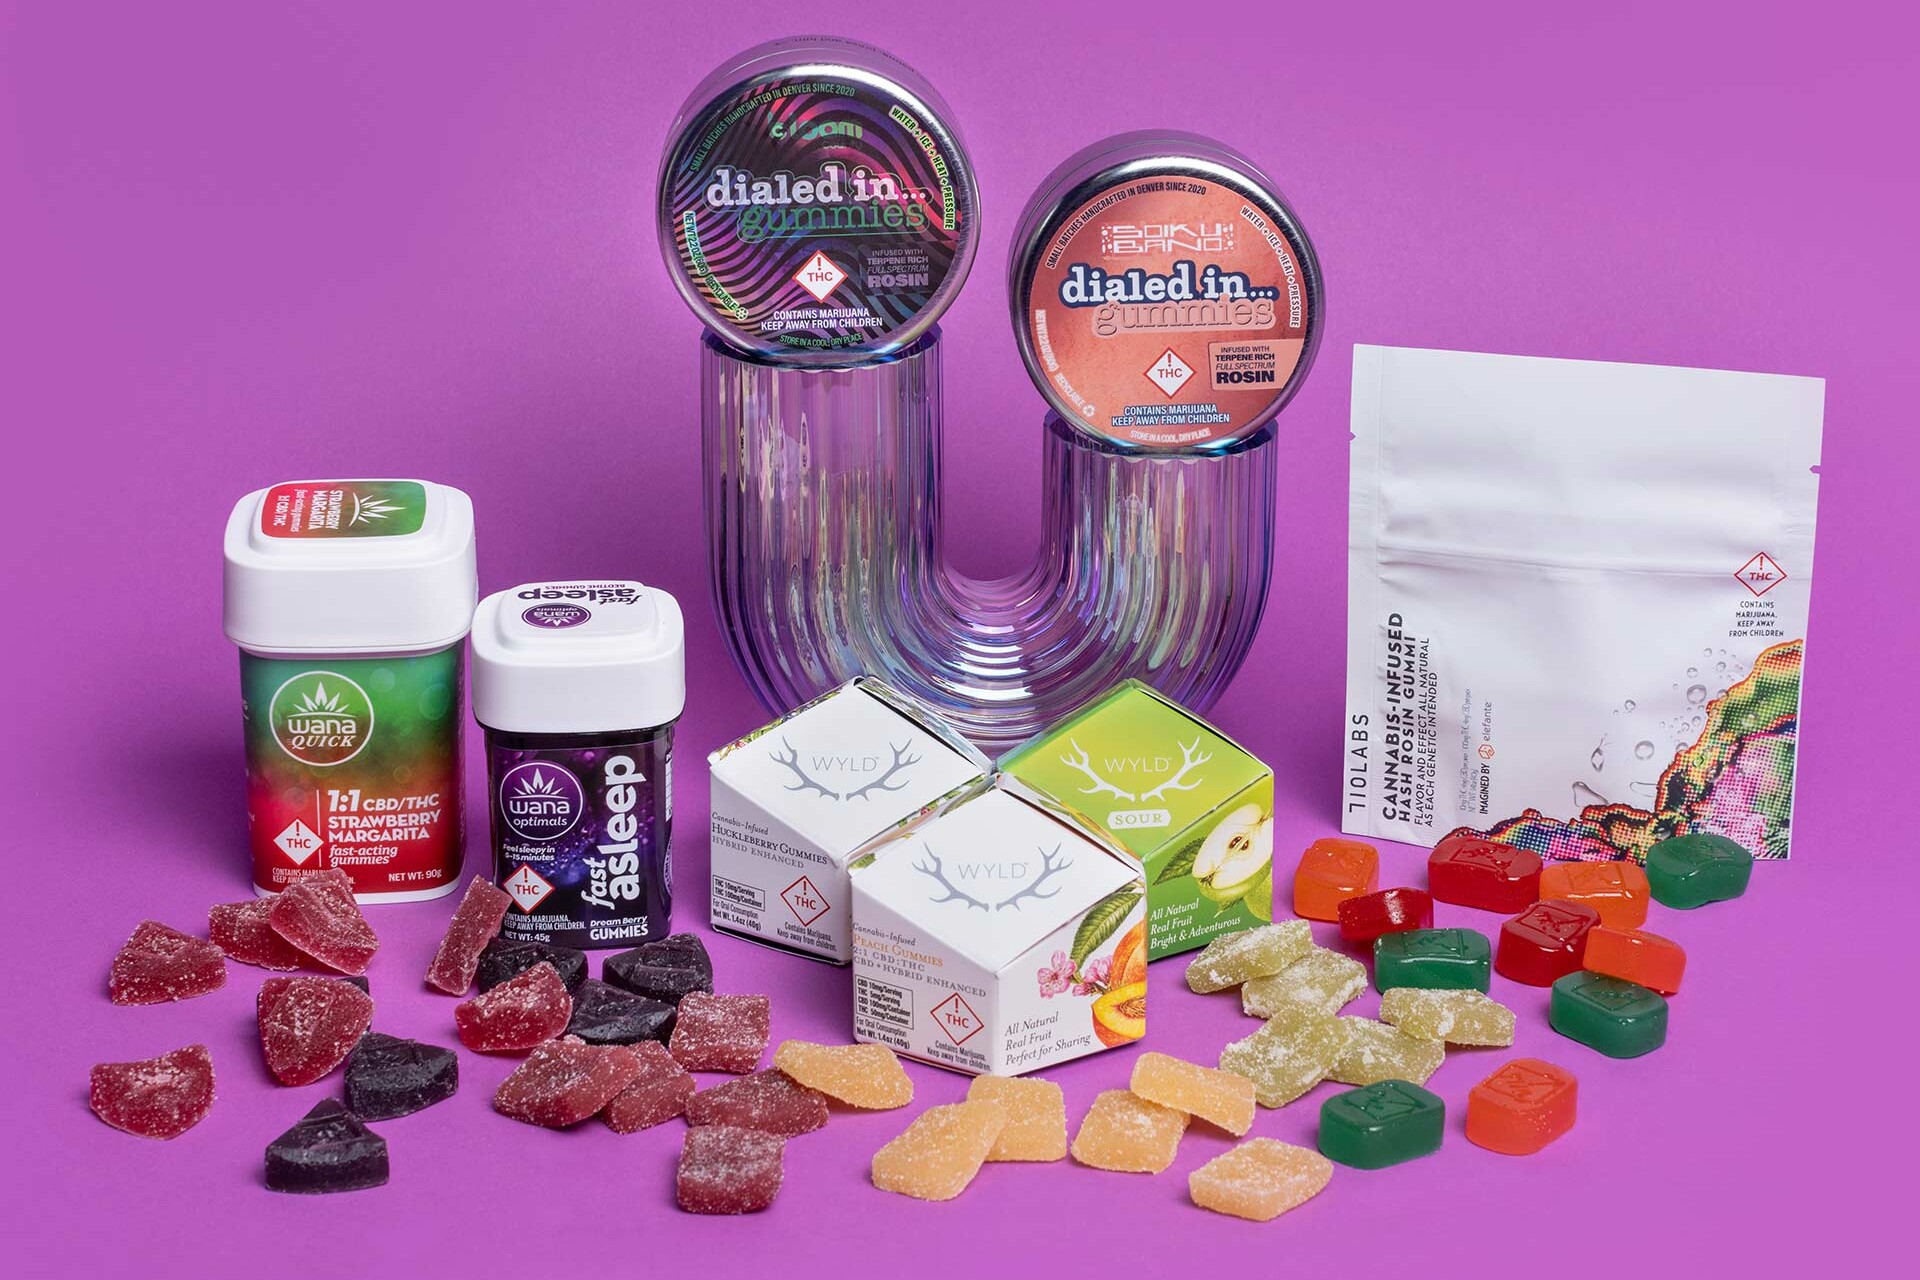 Cannabis Infused Edibles